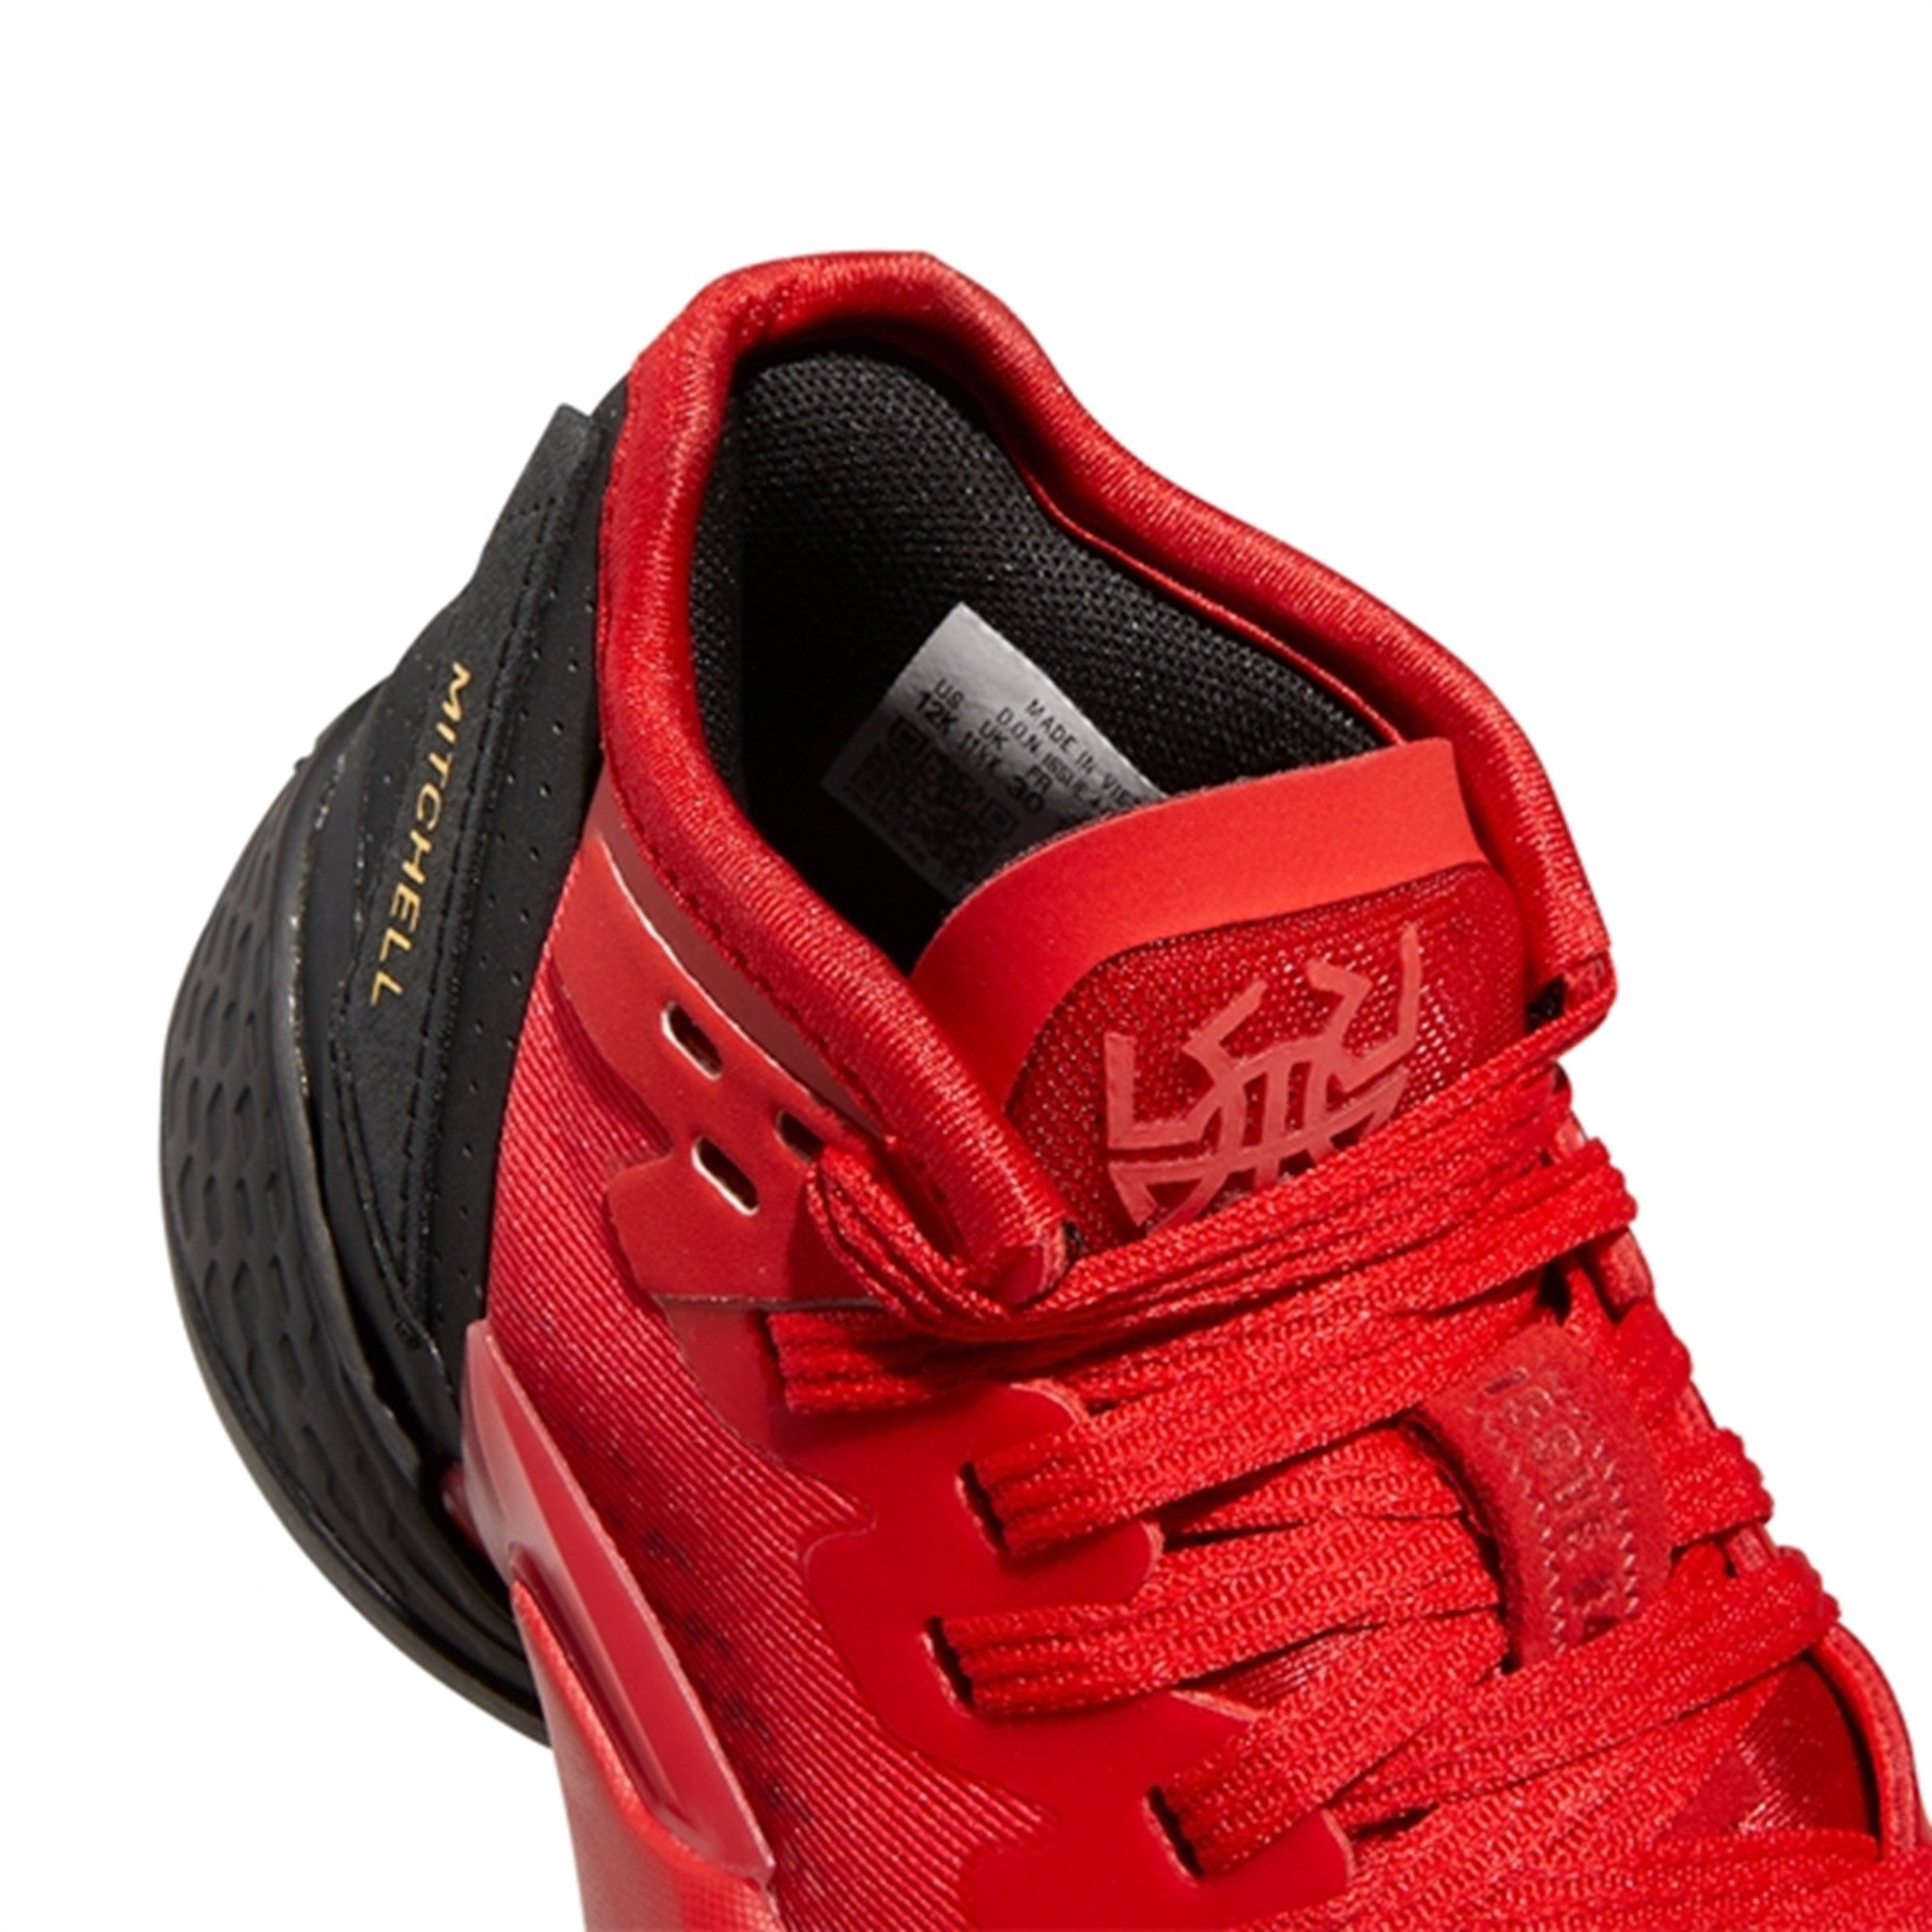 adidas D.O.N. Issue Sneakers Vivid Red 7